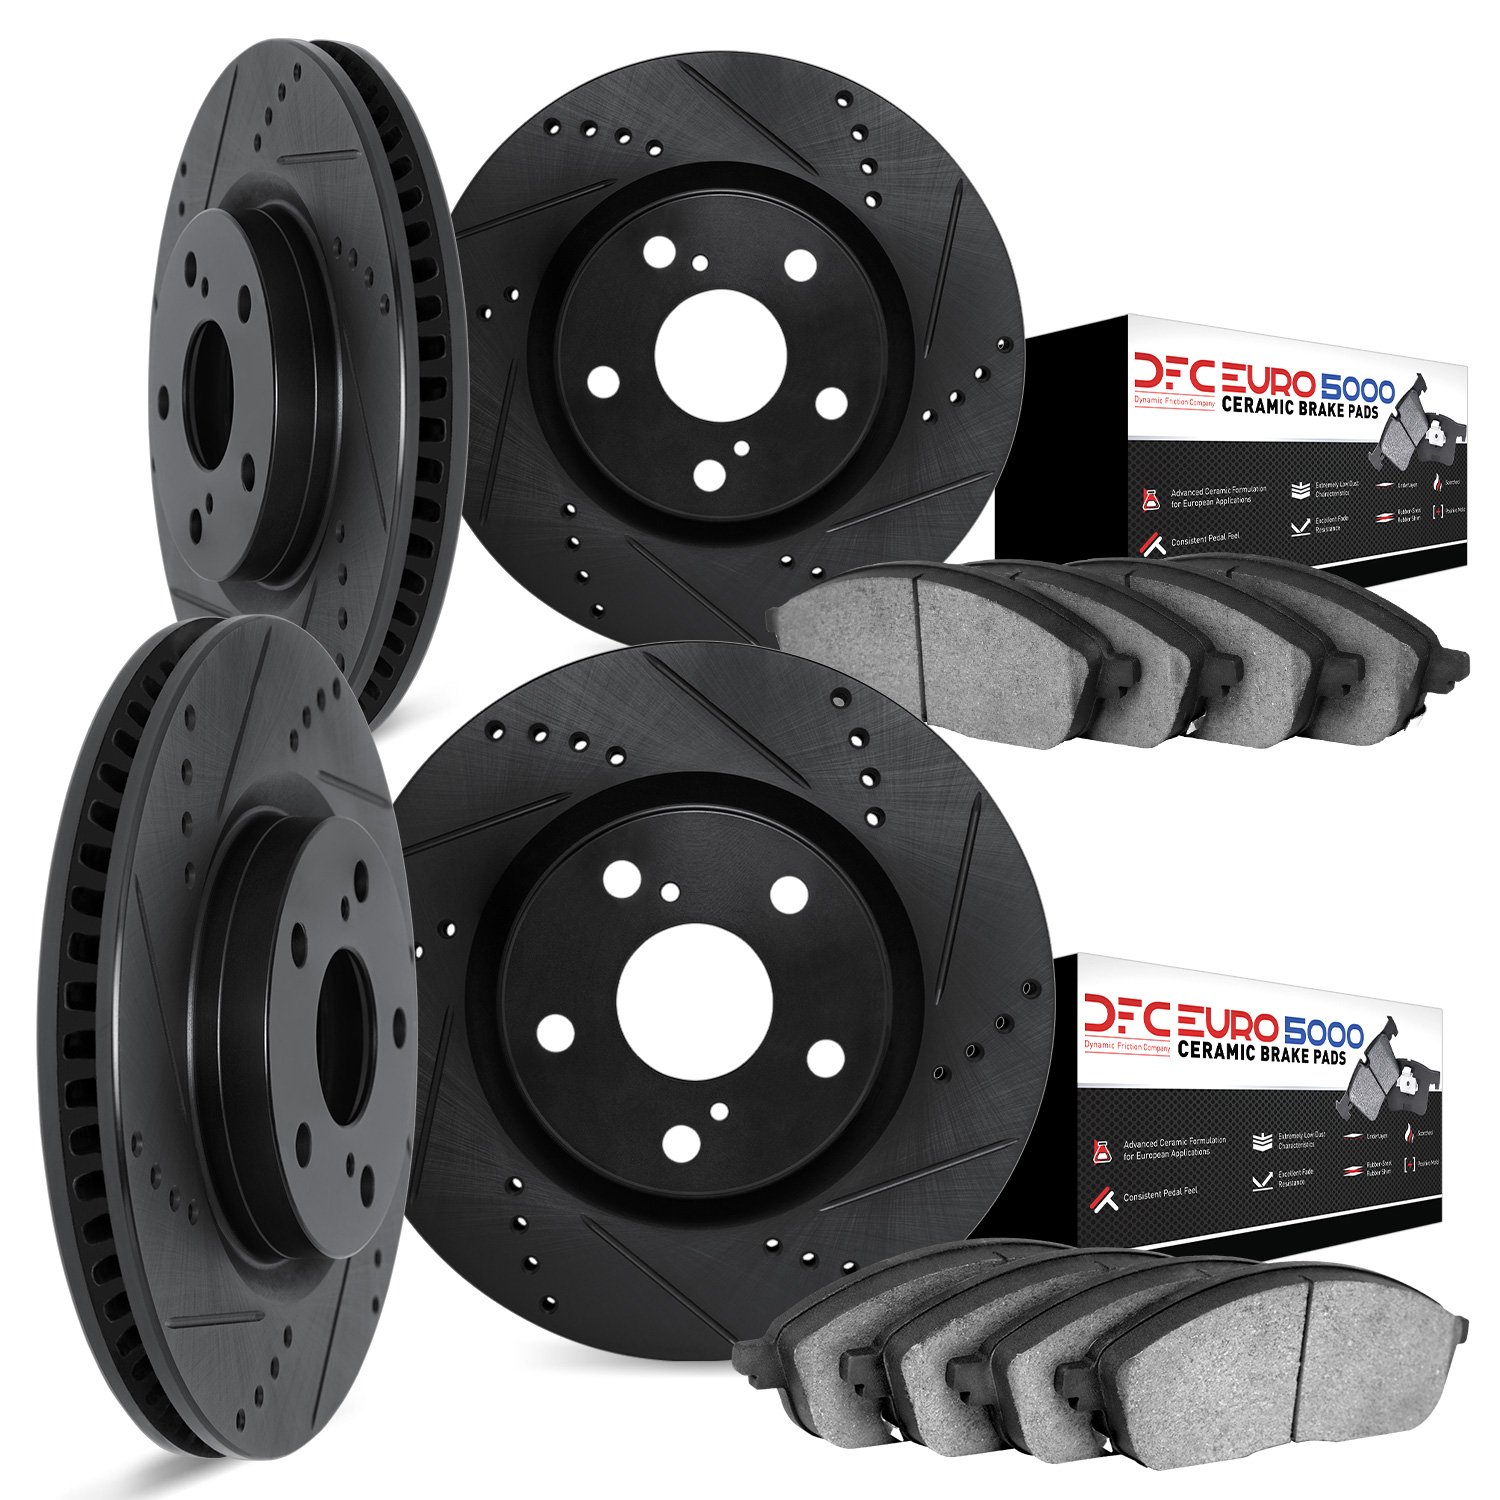 8604-31017 Drilled/Slotted Brake Rotors w/5000 Euro Ceramic Brake Pads Kit [Black], 2006-2008 BMW, Position: Front and Rear